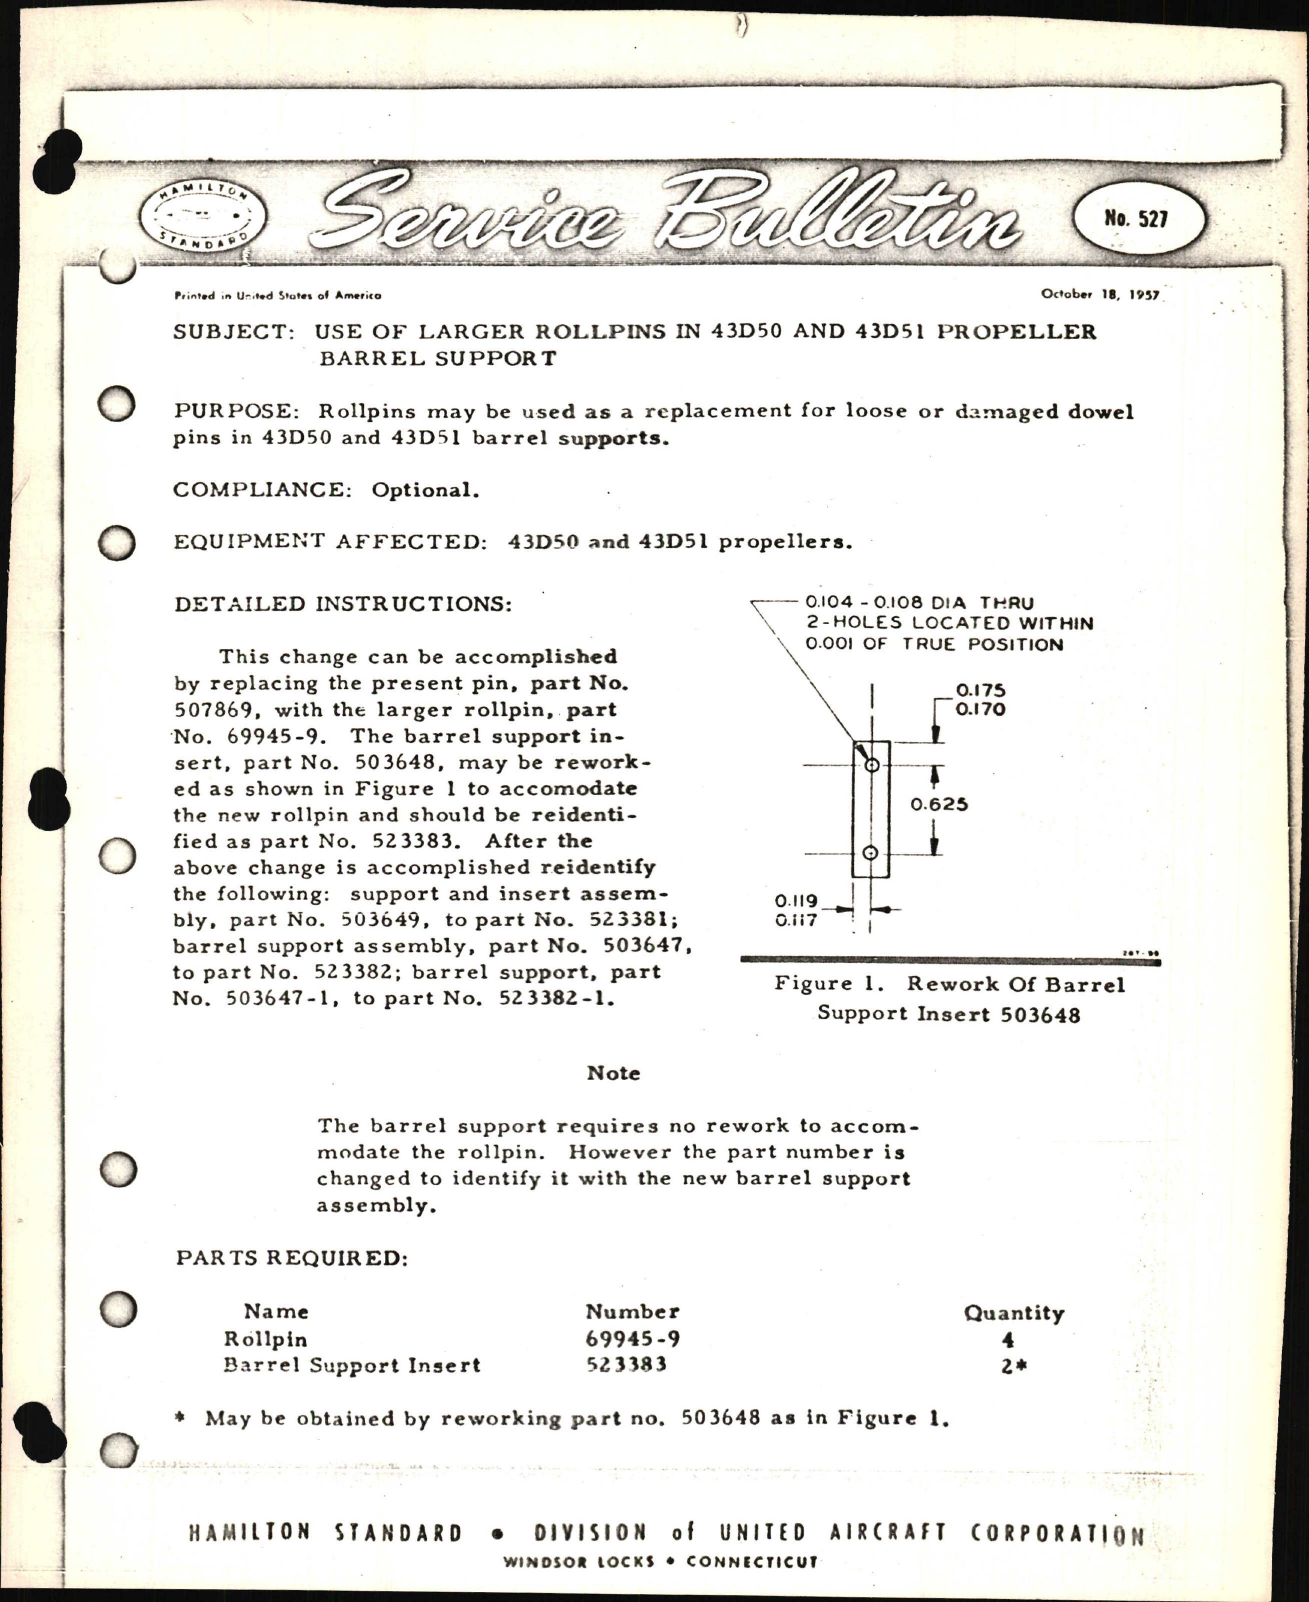 Sample page 1 from AirCorps Library document: Use of Larger Rollpins in 43D50 and 43D51 Propeller Barrel Support